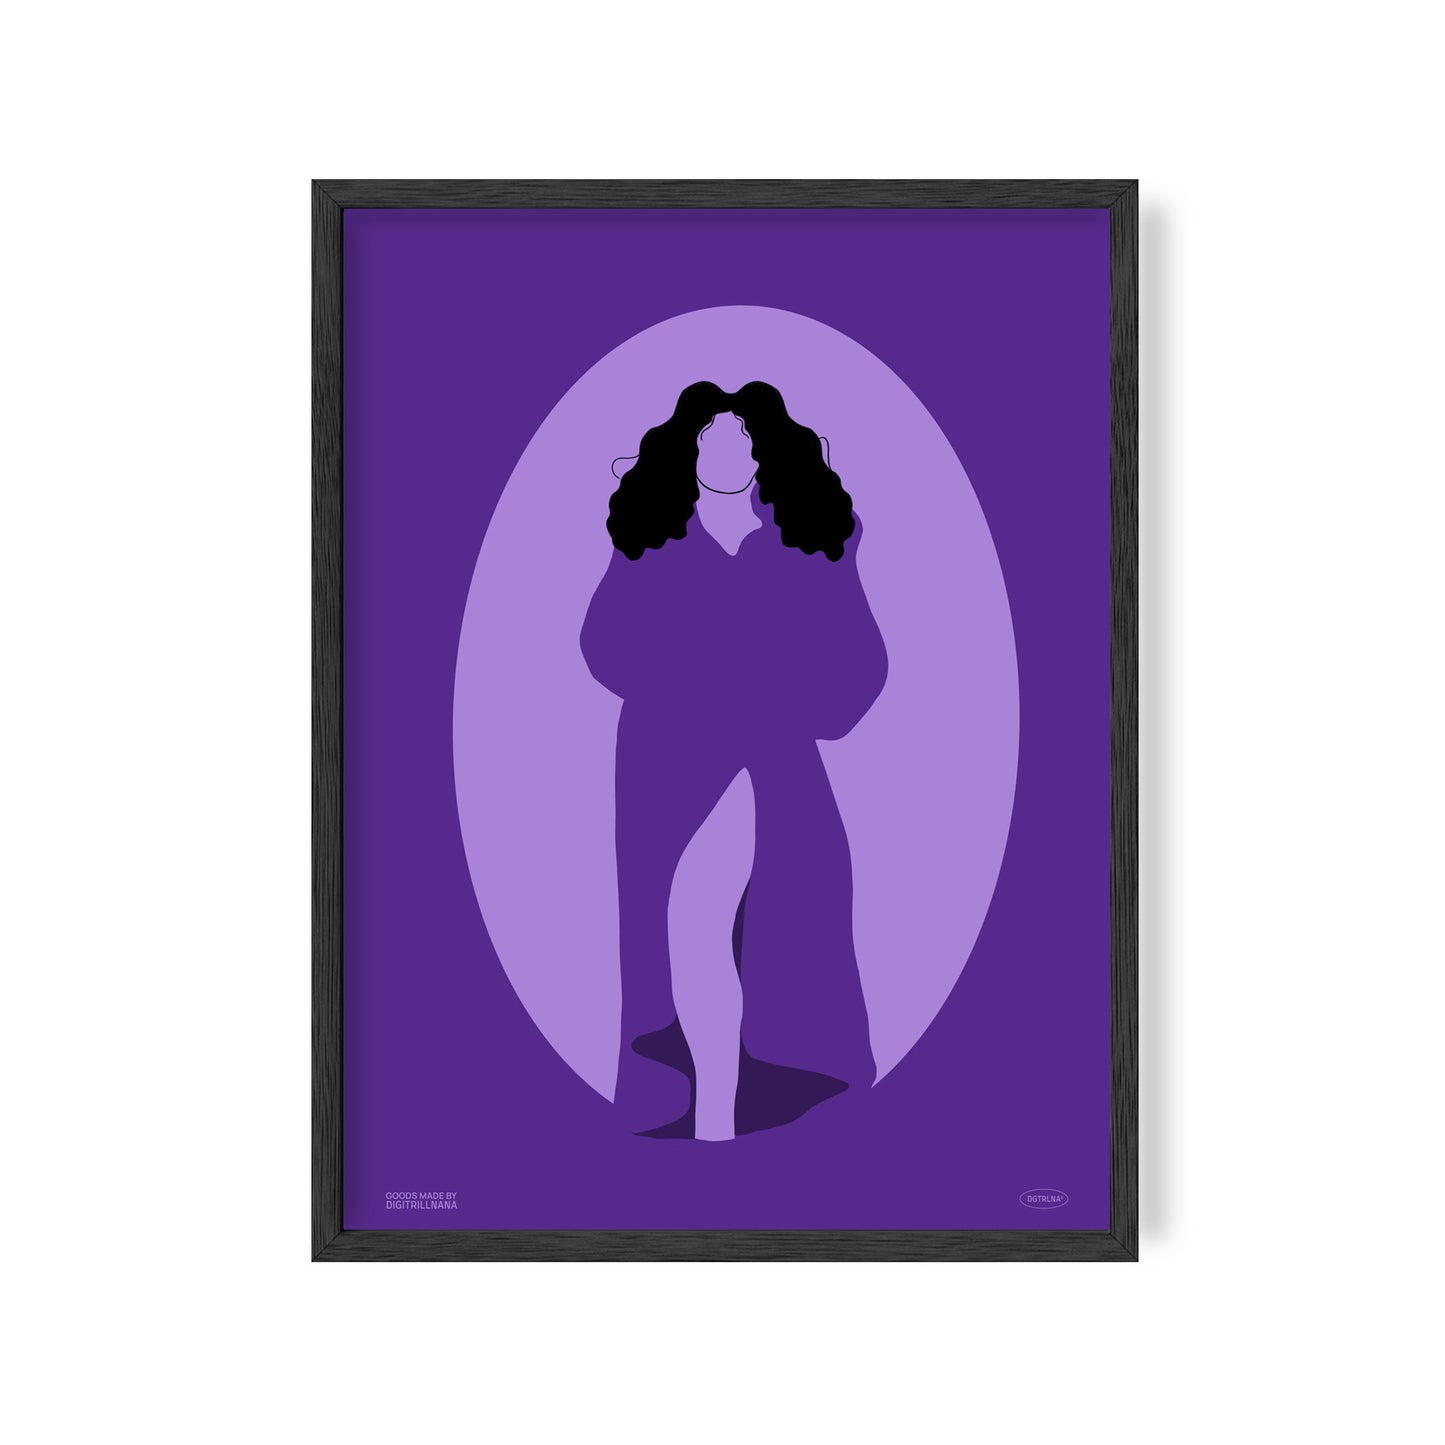 A series of four vibrant monochromatic illustrations of black women figures in the hues orange, blue, and teal. The illustration features a silhouette oval with a women’s figure inside. Light and dark colors create an optical illusion with positive and negative space.  Silhouette 2: Illustration of a purple monochrome silhouette front view of a figure with full curly hair flower over a full coverage dress with a leg peaking through the slit. 